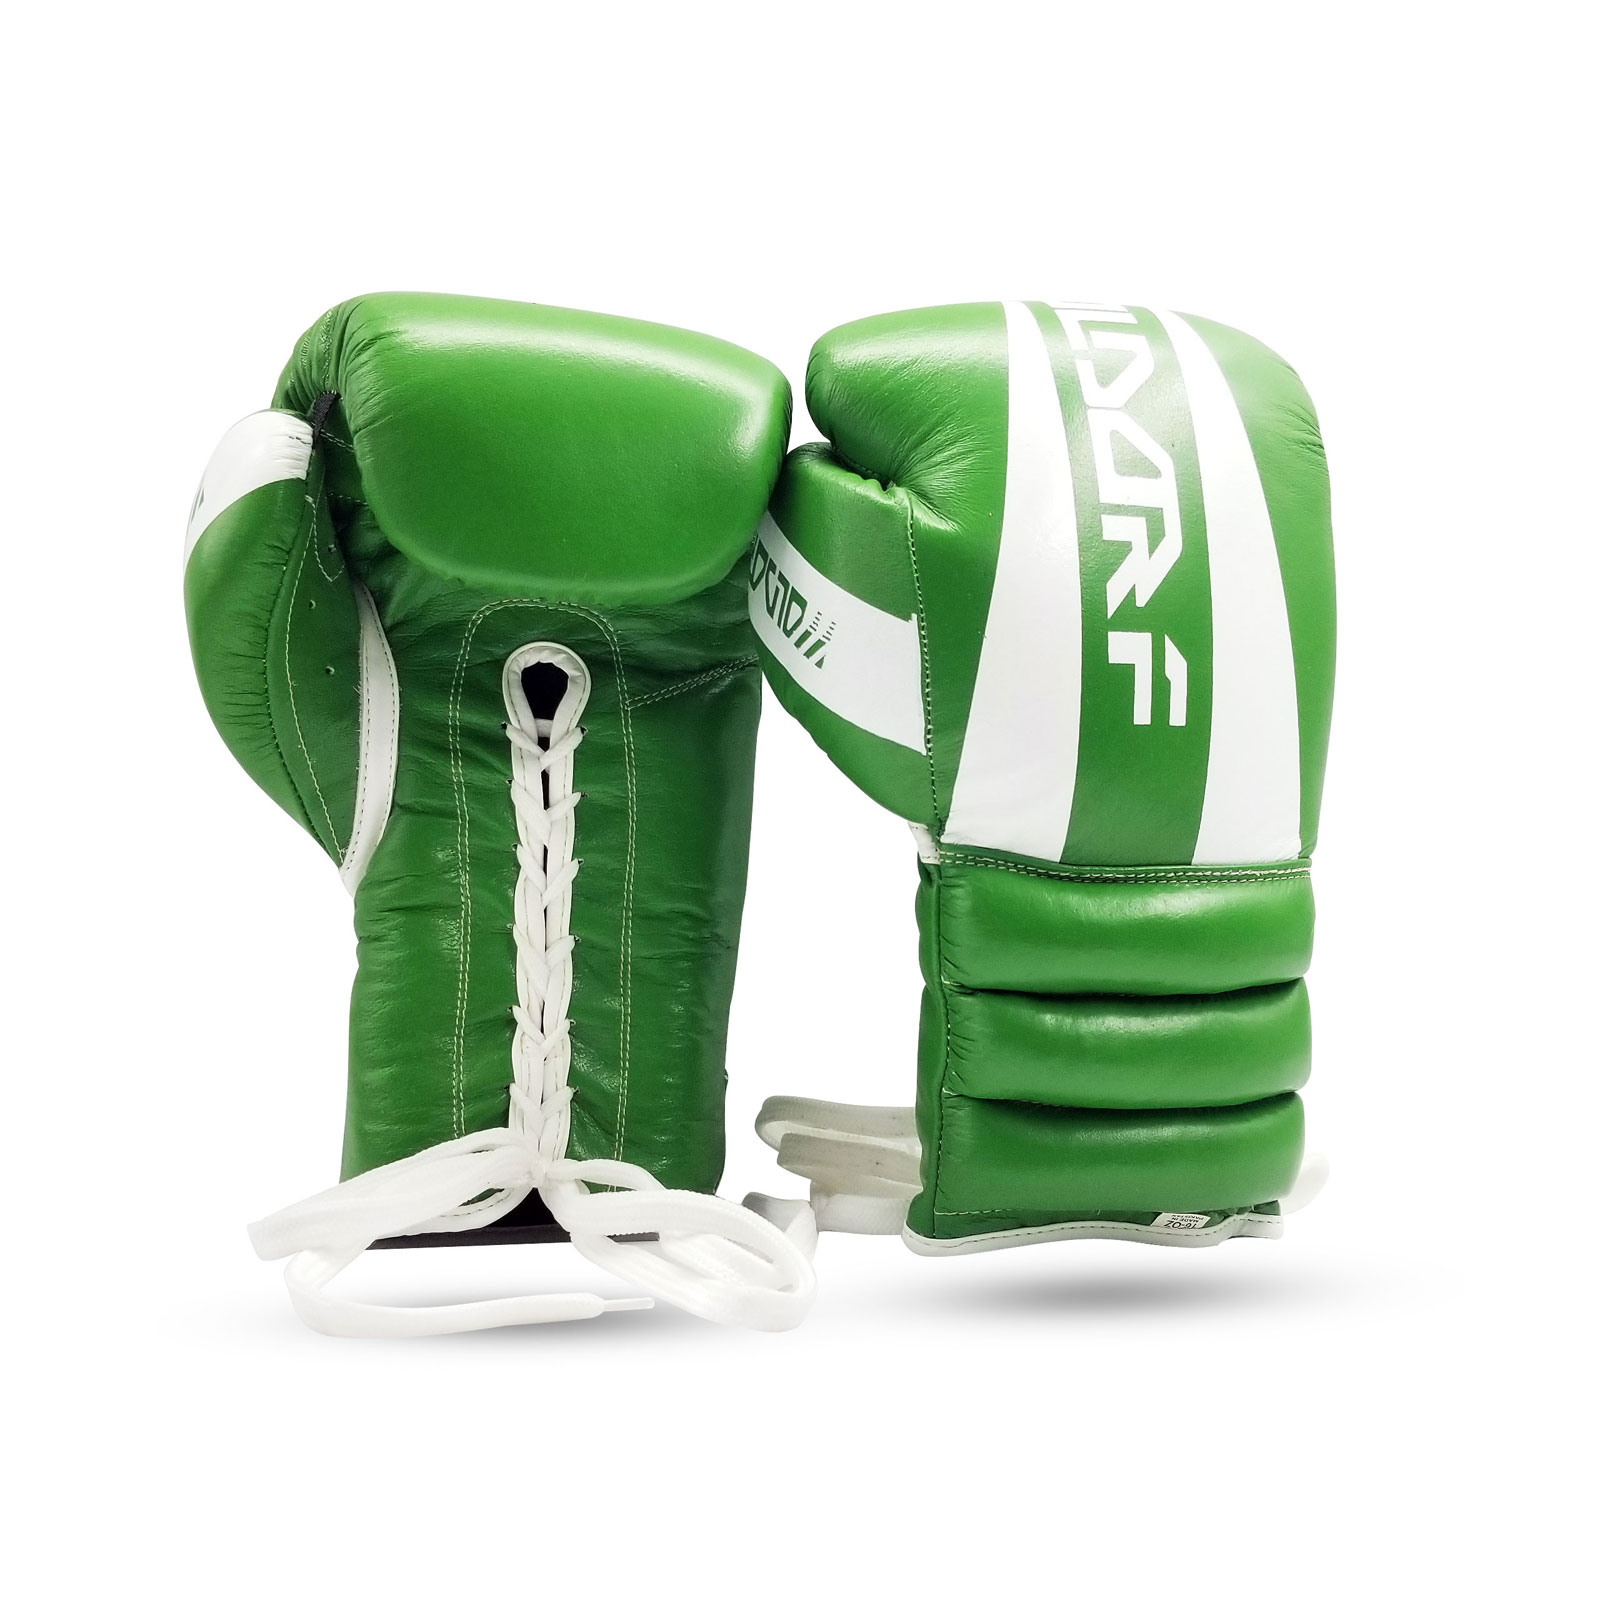 Woldorf USA Boxing Bag Gloves Sparring MMA Fighting Kickboxing Muay Thai Green 